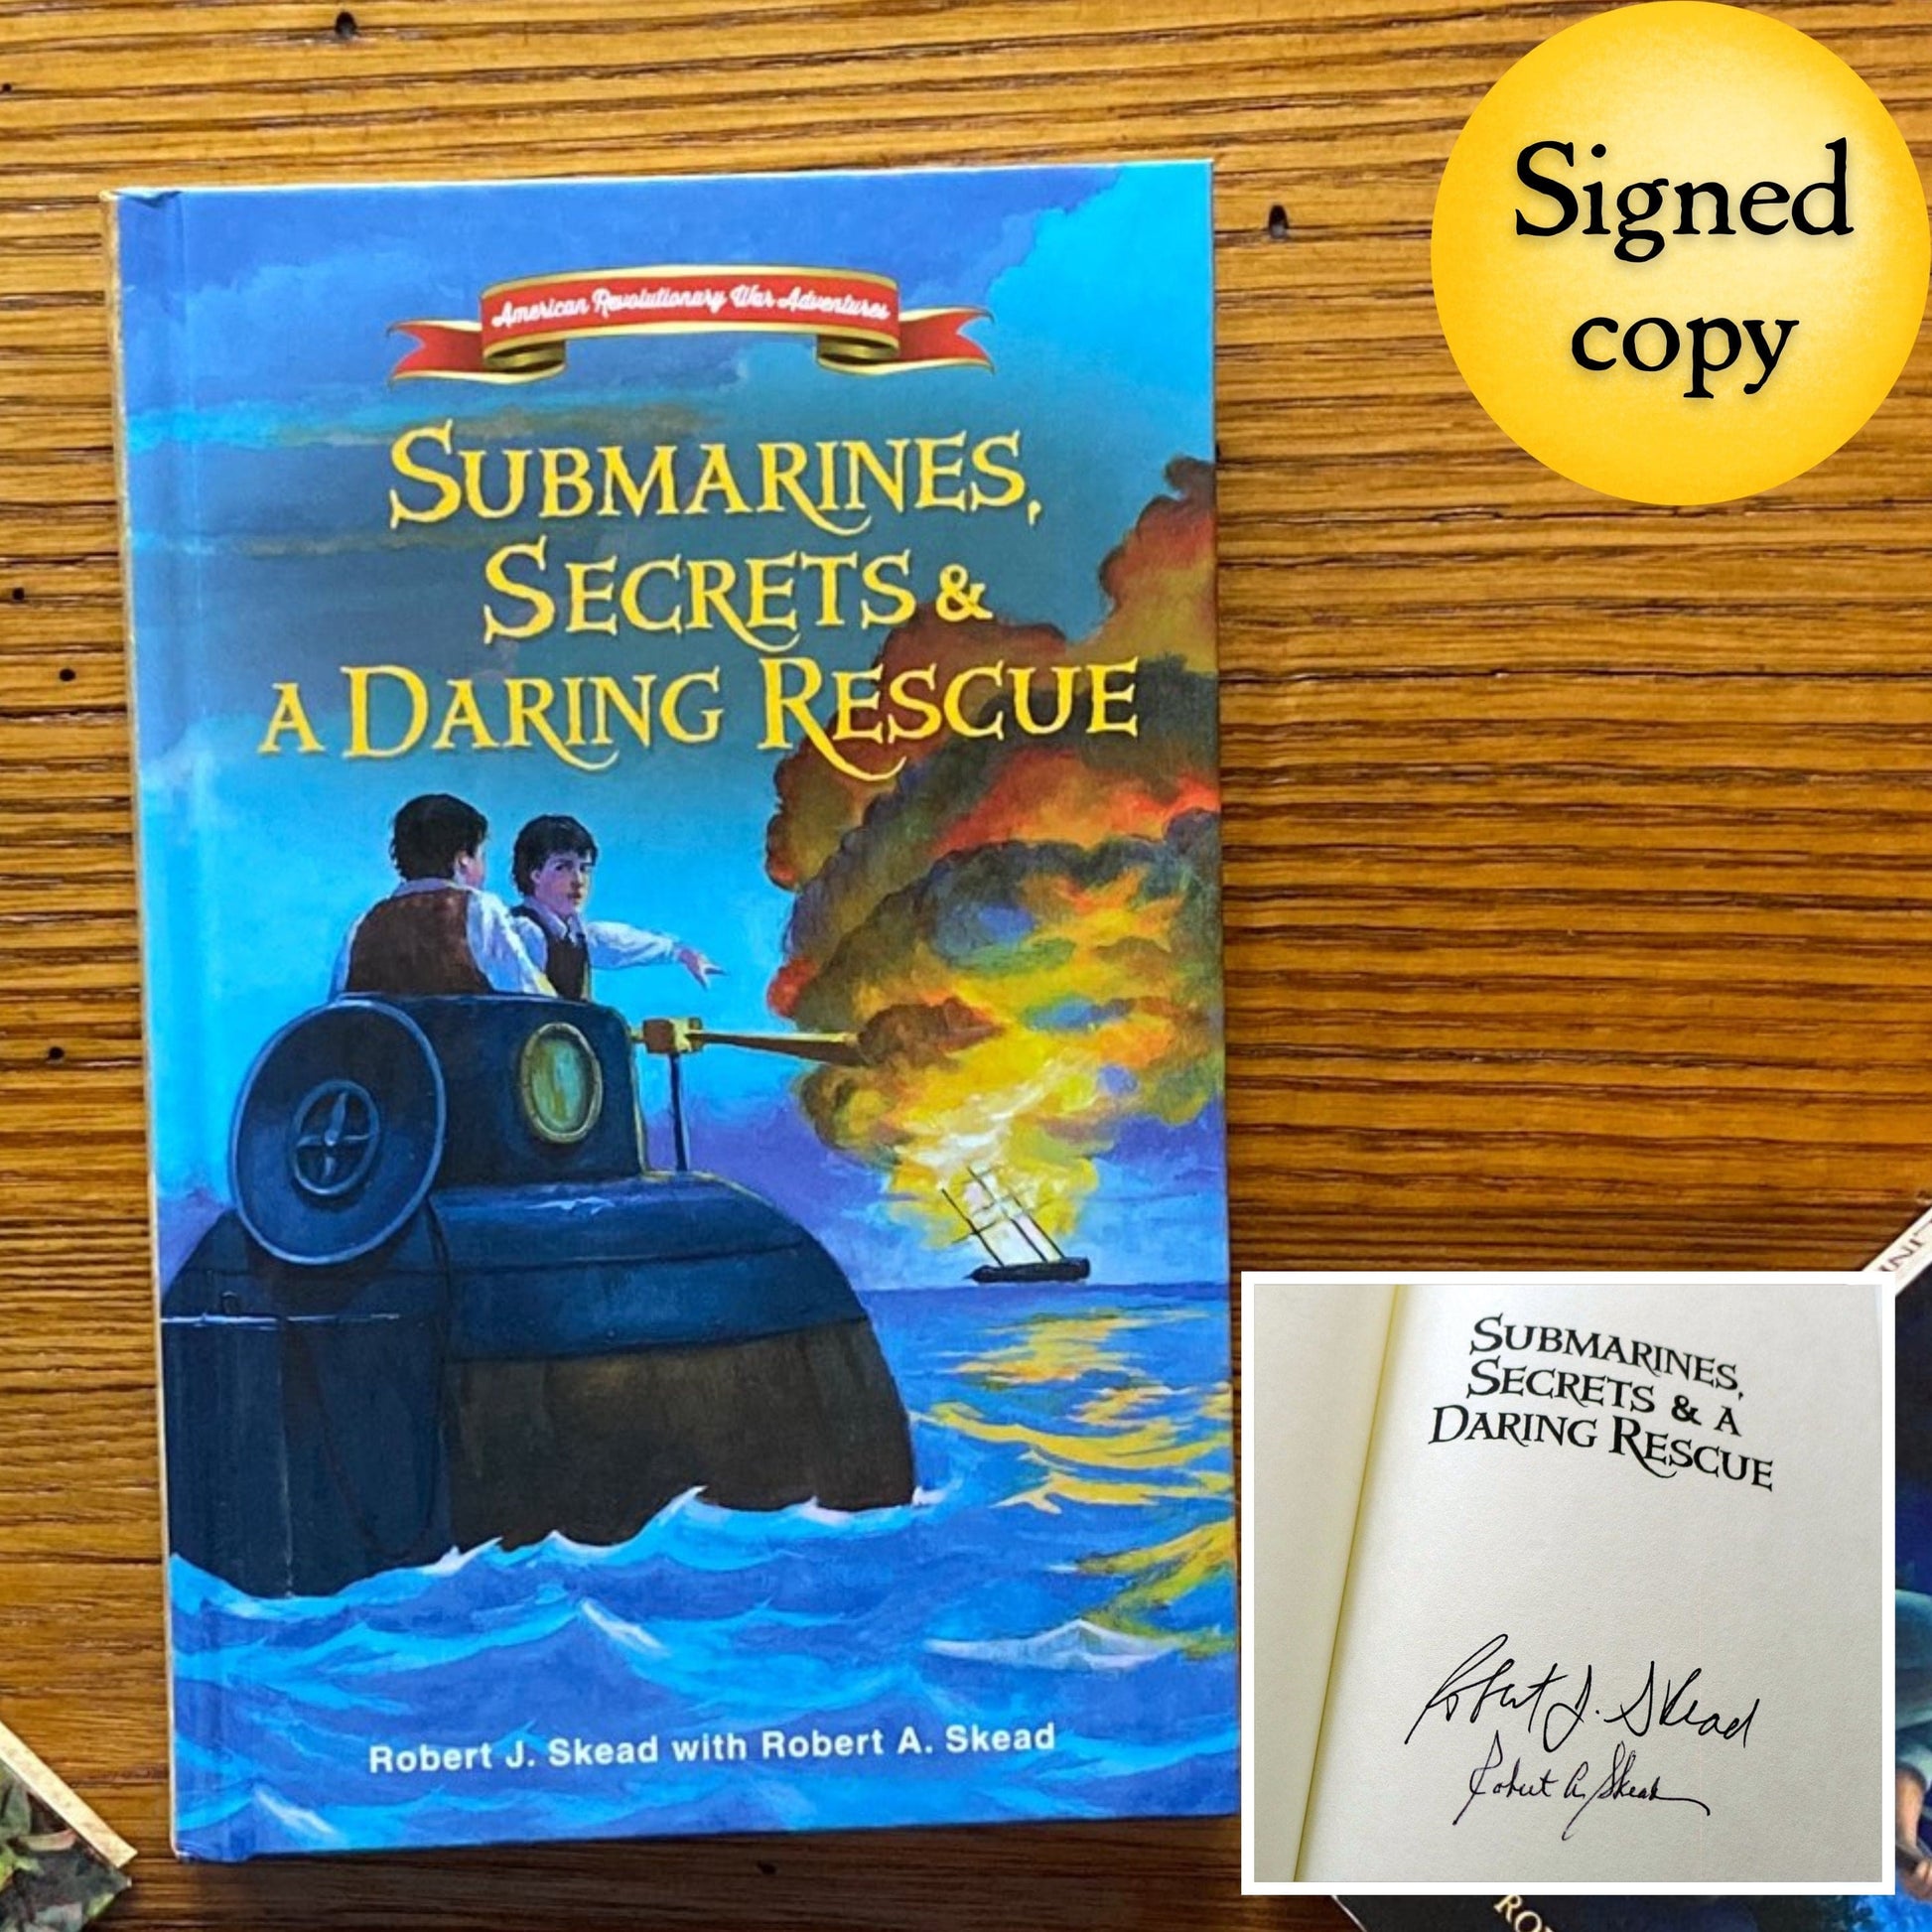 "Submarines, Secrets & A Daring Rescue" - Signed by the Authors, Robert J. Skead and Robert A. Skead from The History List Store